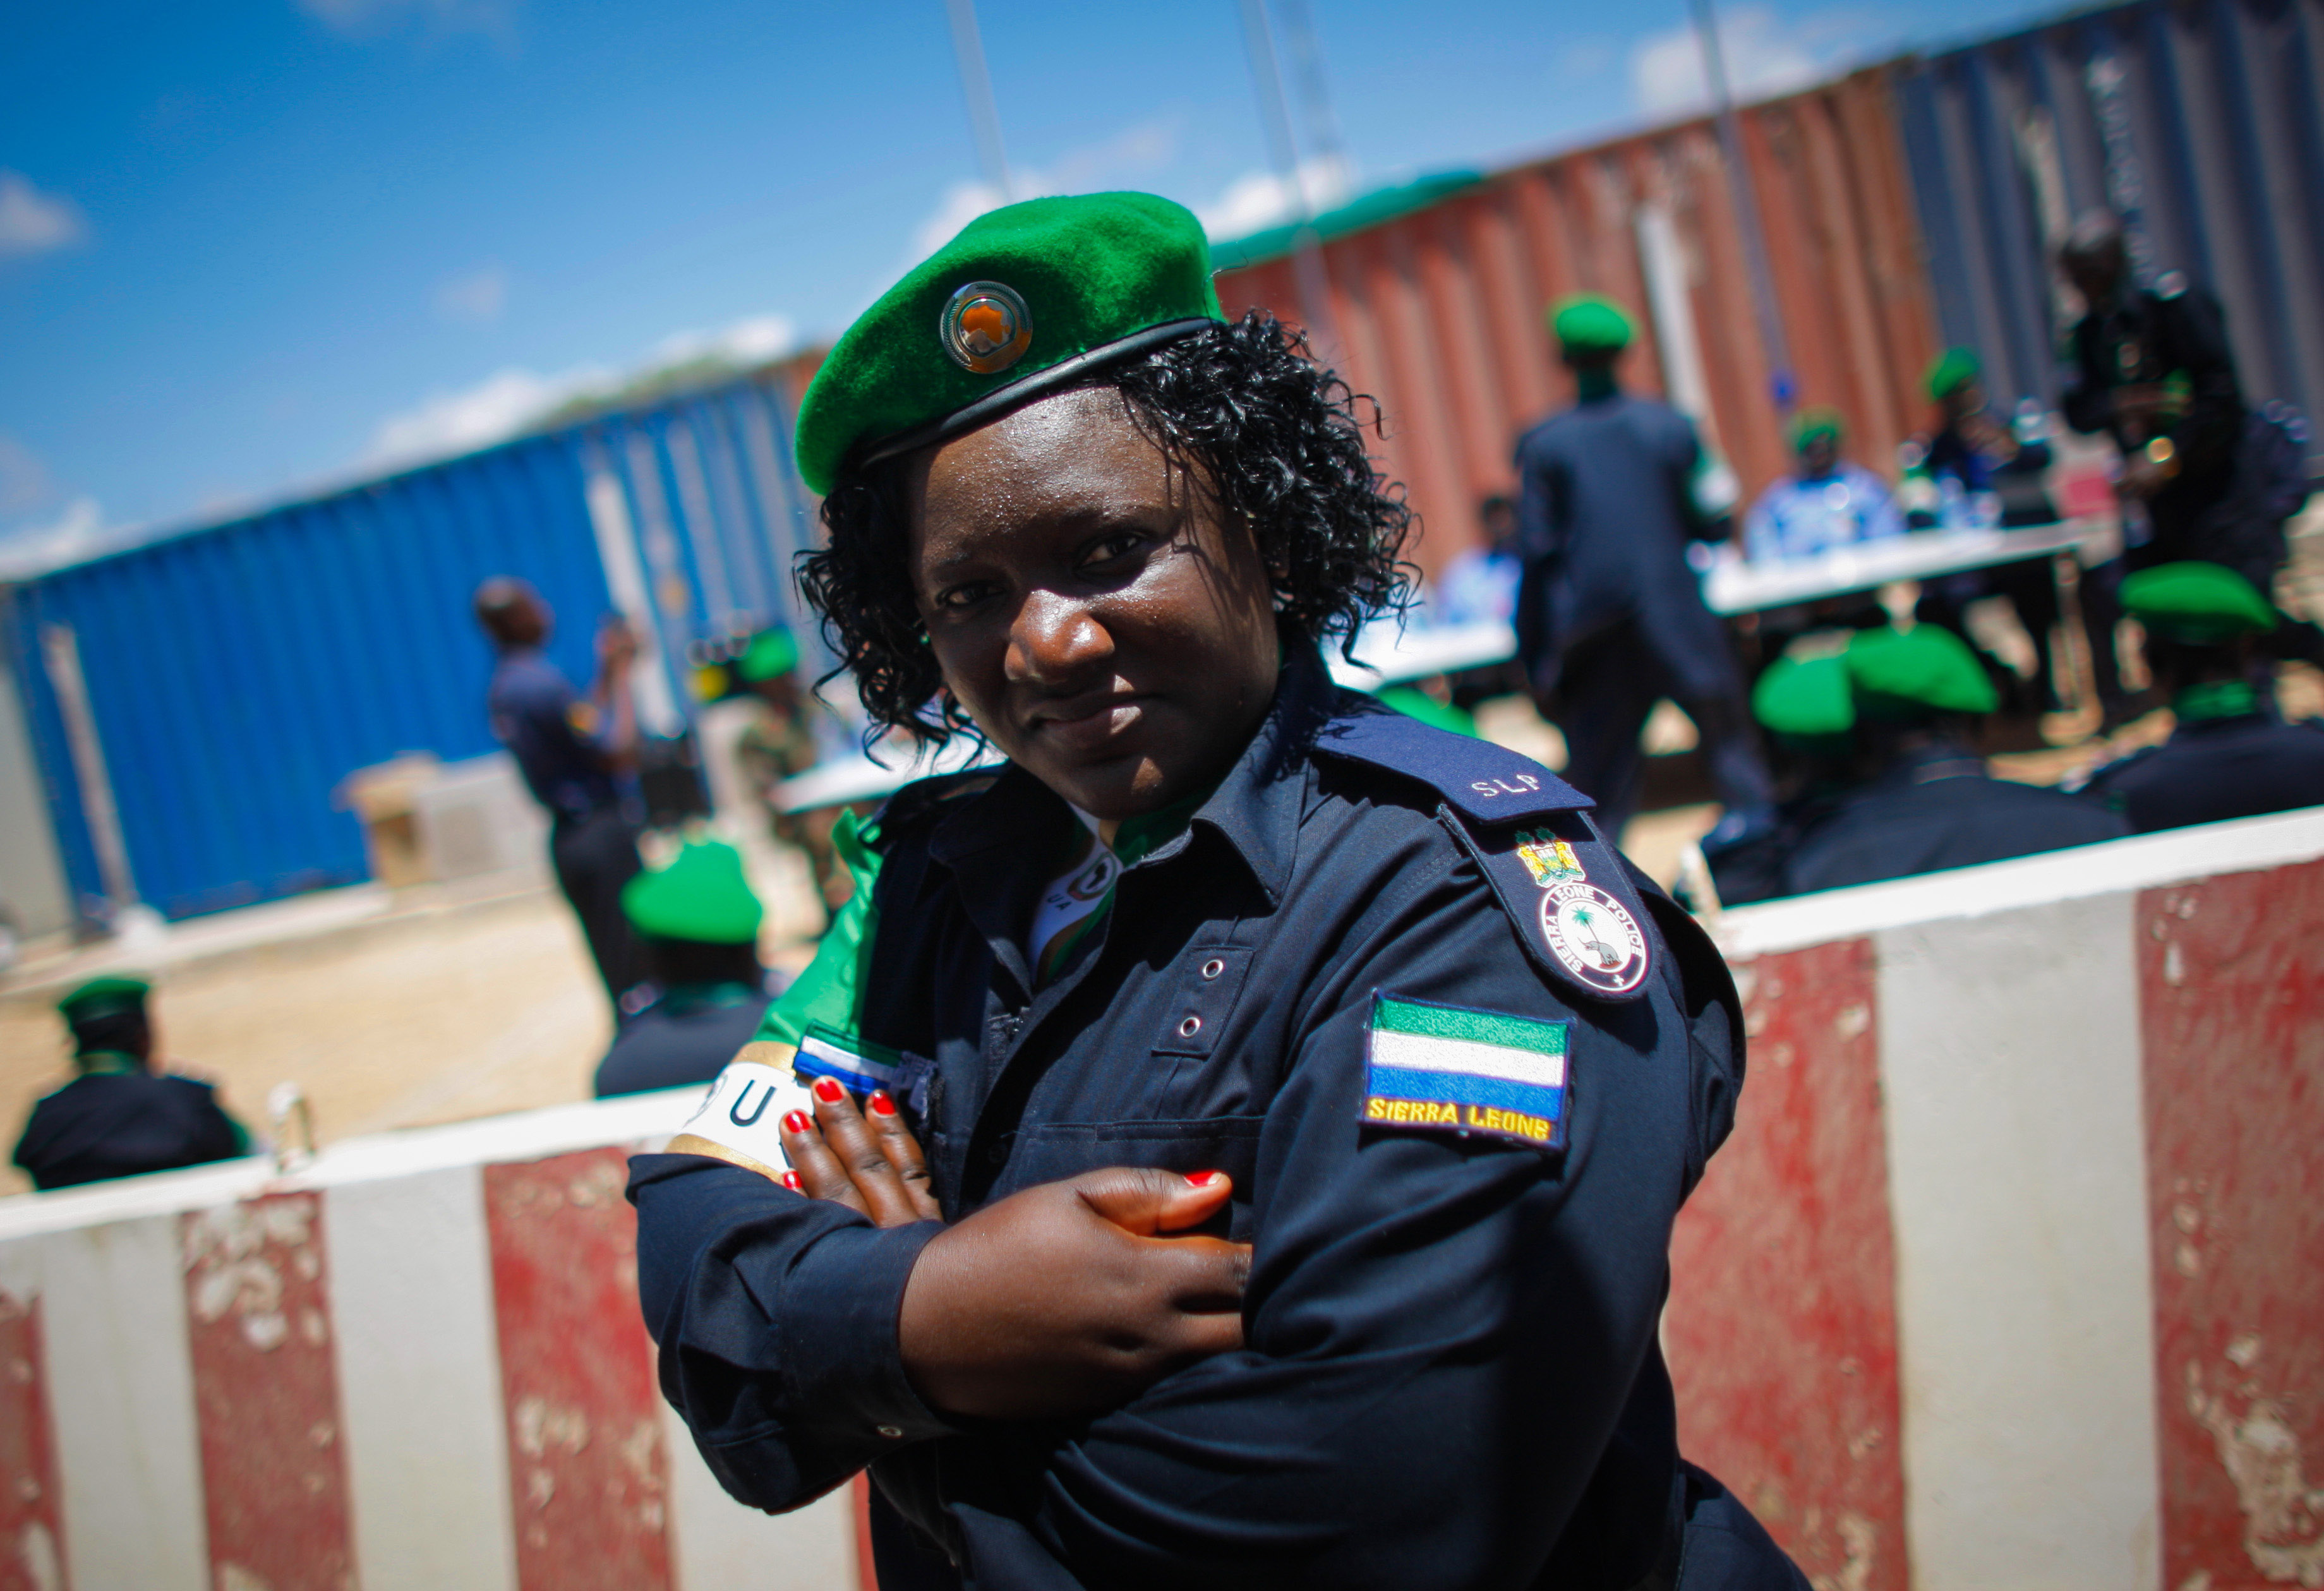 Officer from the Sierra Leonean Contingent serving with the African Union Mission in Somalia (AMISOM) Individual Police Officers (IPO) stands following a medal parade at the AU Mission's headquarters in the Somali capital Mogadishu, where they have been central in assisting the reforming of the Somali Police Force (SPF) as it rebuilds after two decades of conflict and instability. Photo: Stuart Price/AMISOM Public Information via Flickr